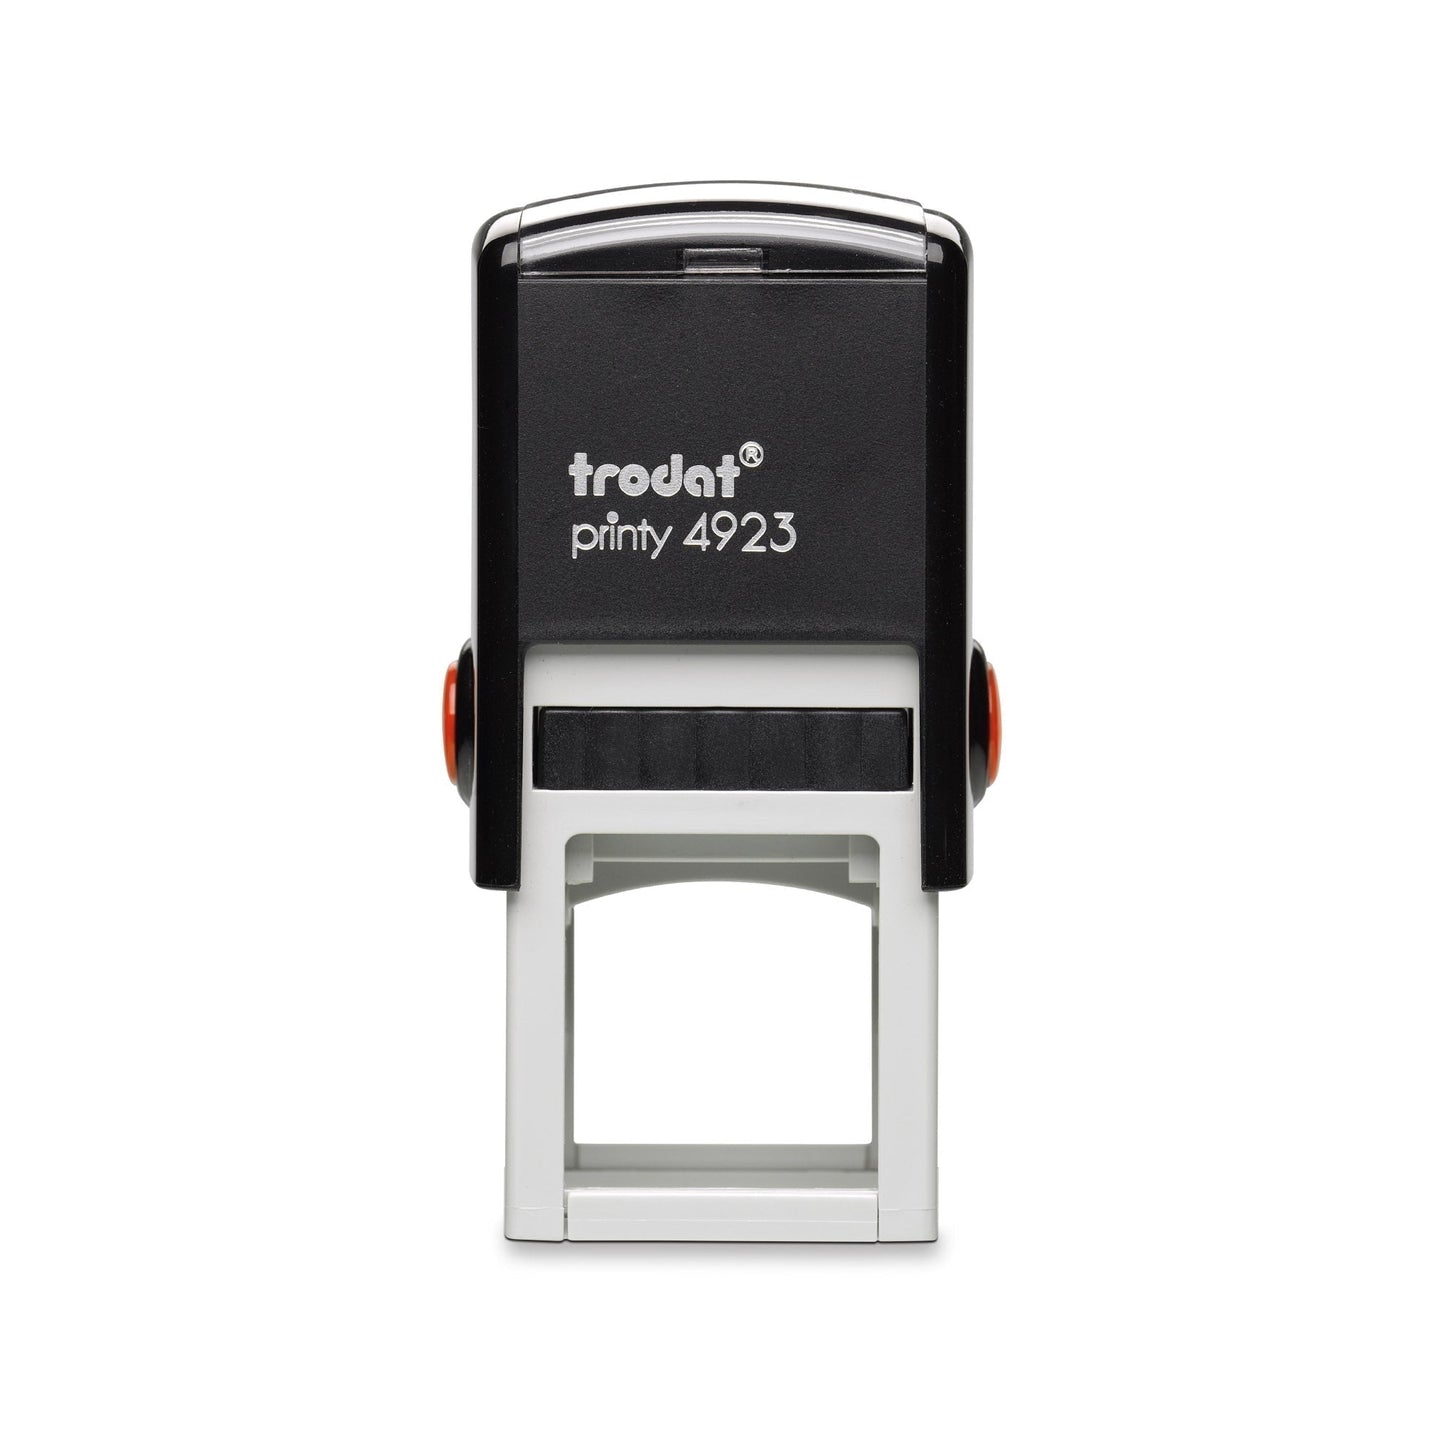 Specialist Serviced - Self Inking Rubber Stamp - Trodat 4923 - 28mm x 28mm Impression